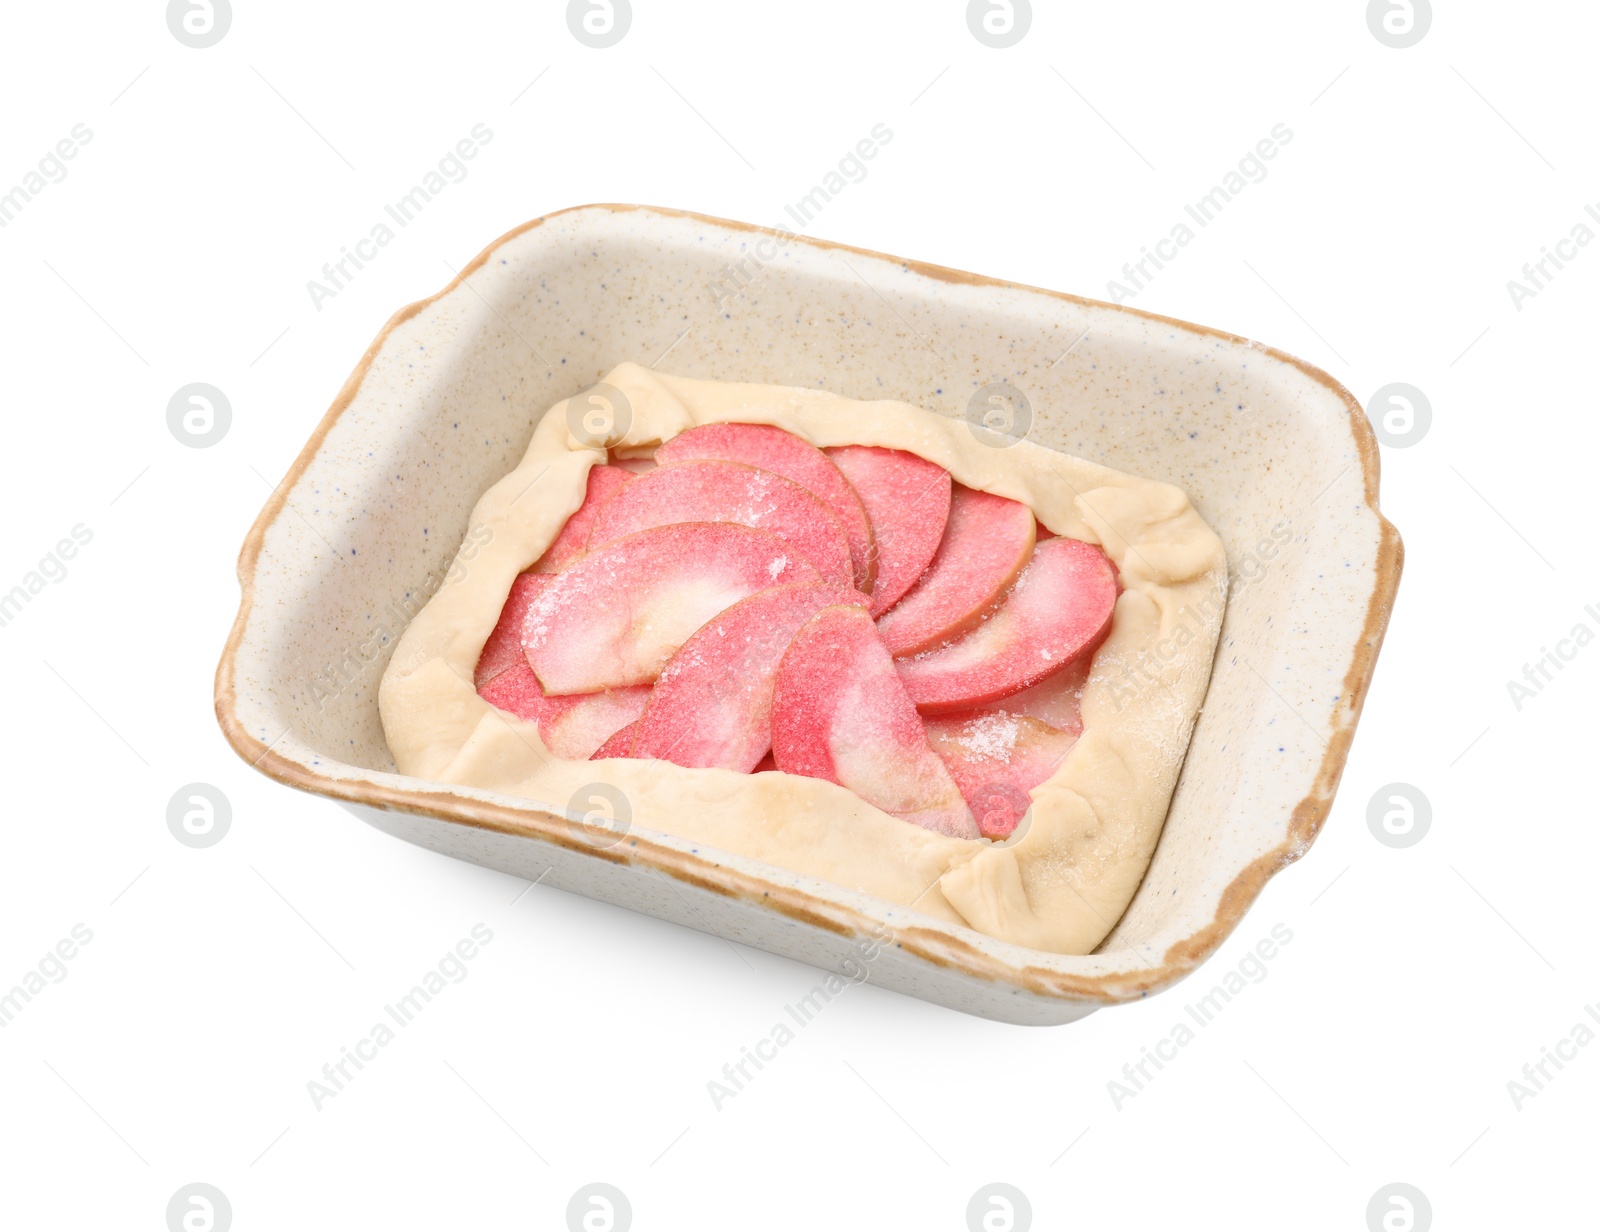 Photo of Baking dish with fresh dough and apples isolated on white. Making galette